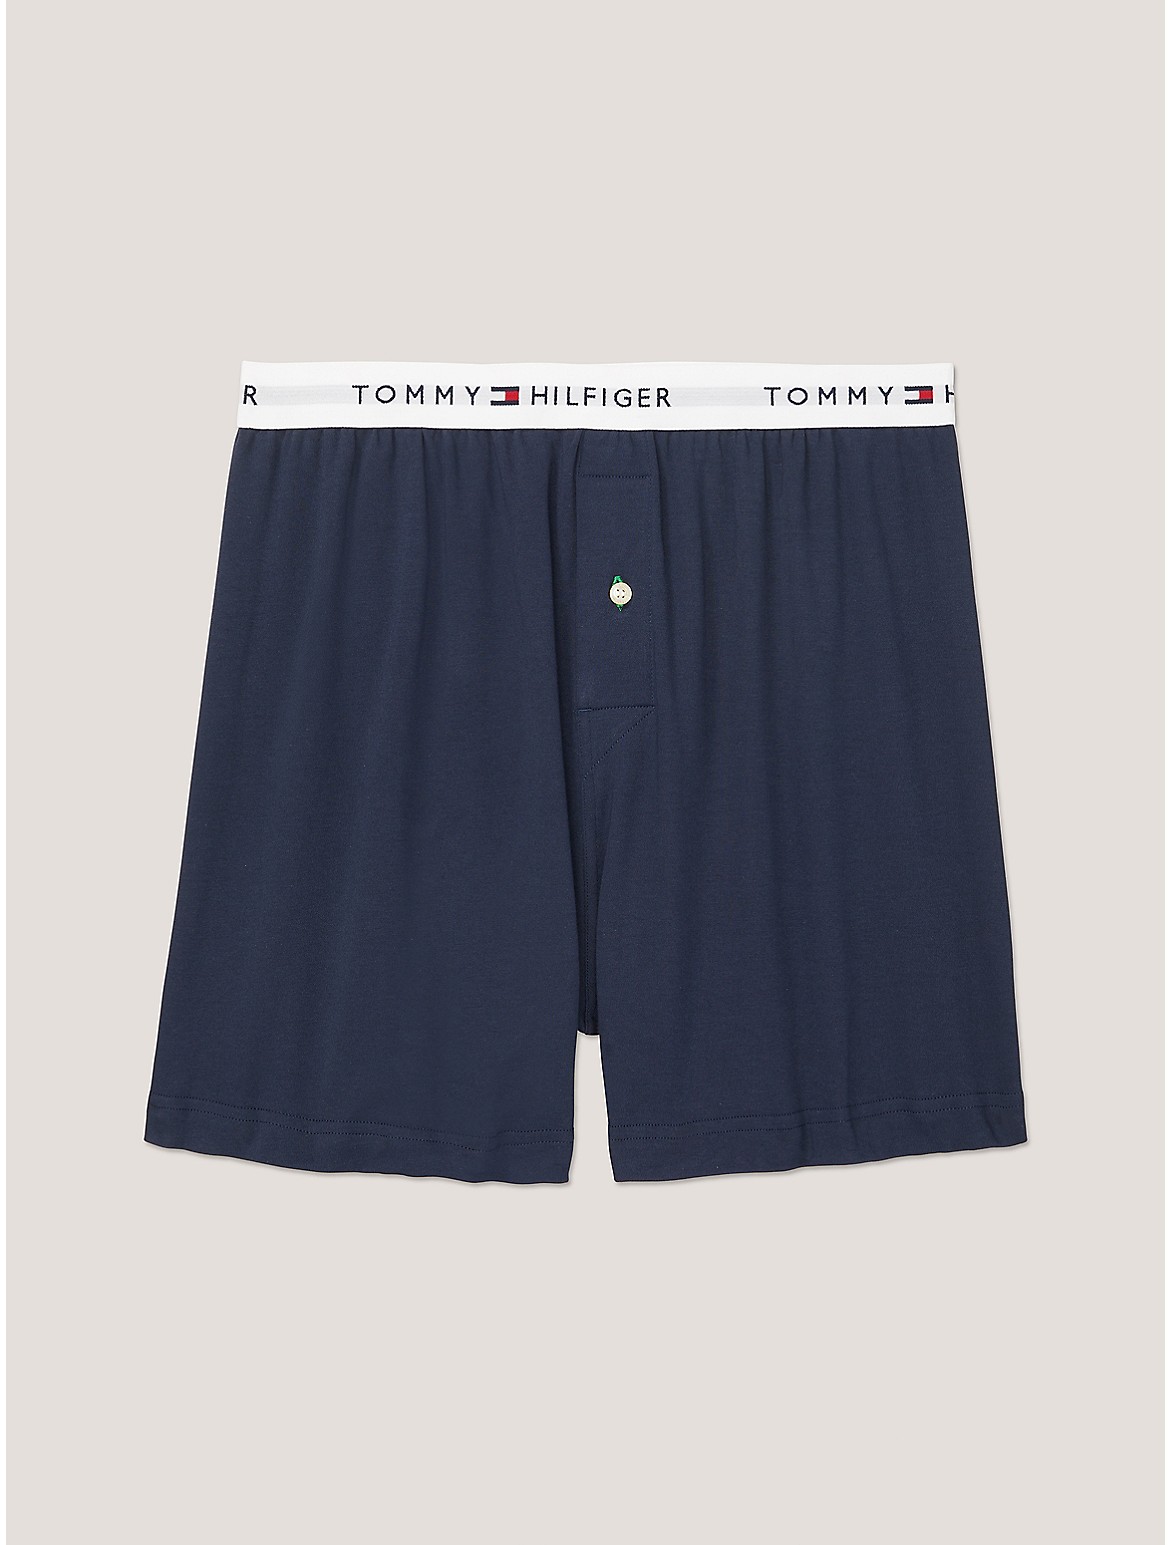 Tommy Hilfiger Cotton Classics Boxer Single Pack In Dark Navy